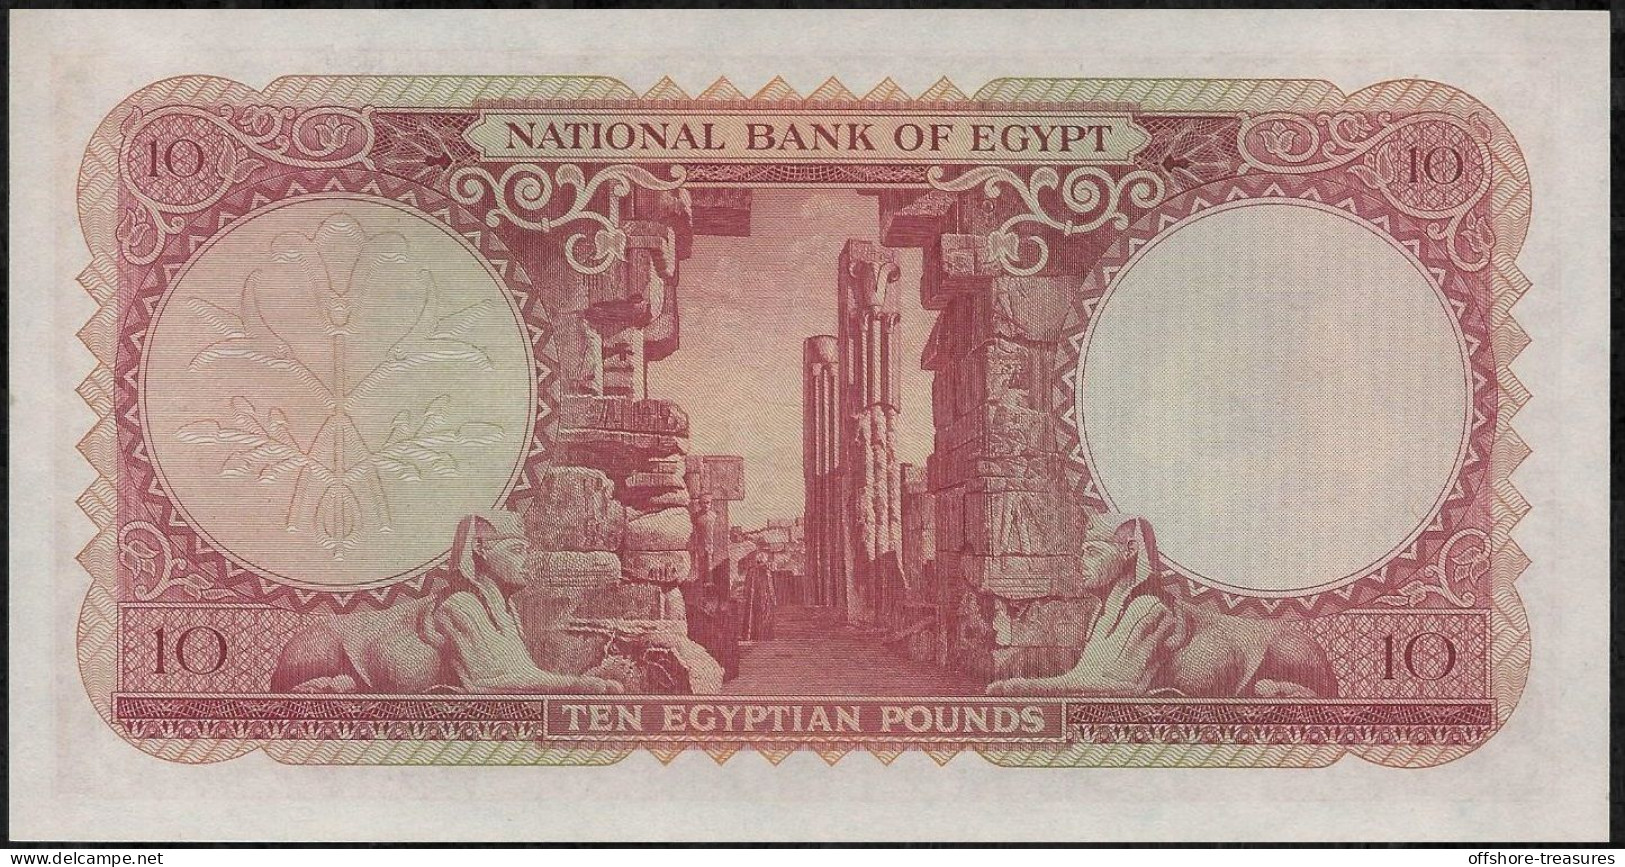 Egypt 10 POUNDS 1955 UNC National Bank KING TUT RED Banknote Sign Ahmed Zaki Saad RARE Grade Pick 32B - Aegypten